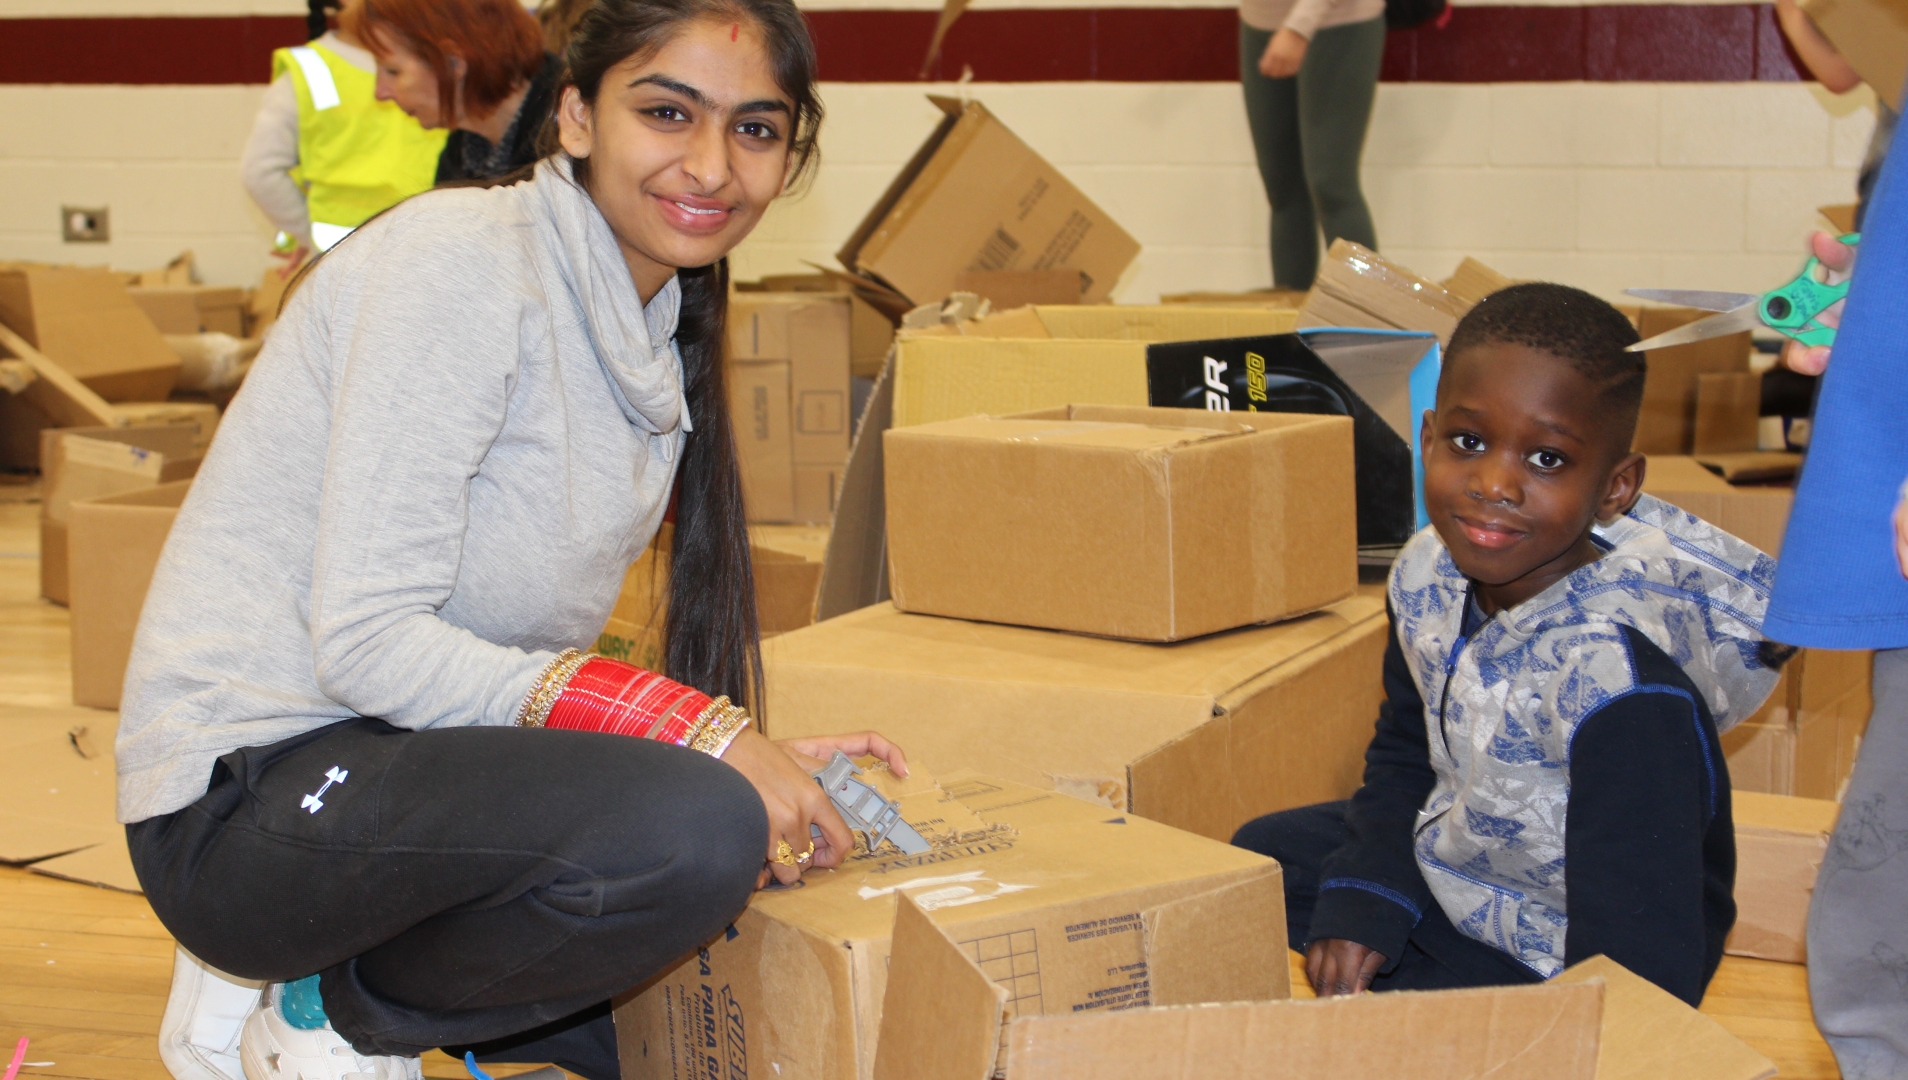 A woman in the left of the frame crouches down beside a young boy who appears in the right of the frame. They both smile at the camera, surrounded by empty cardboard boxes they appear to have been playing with. 